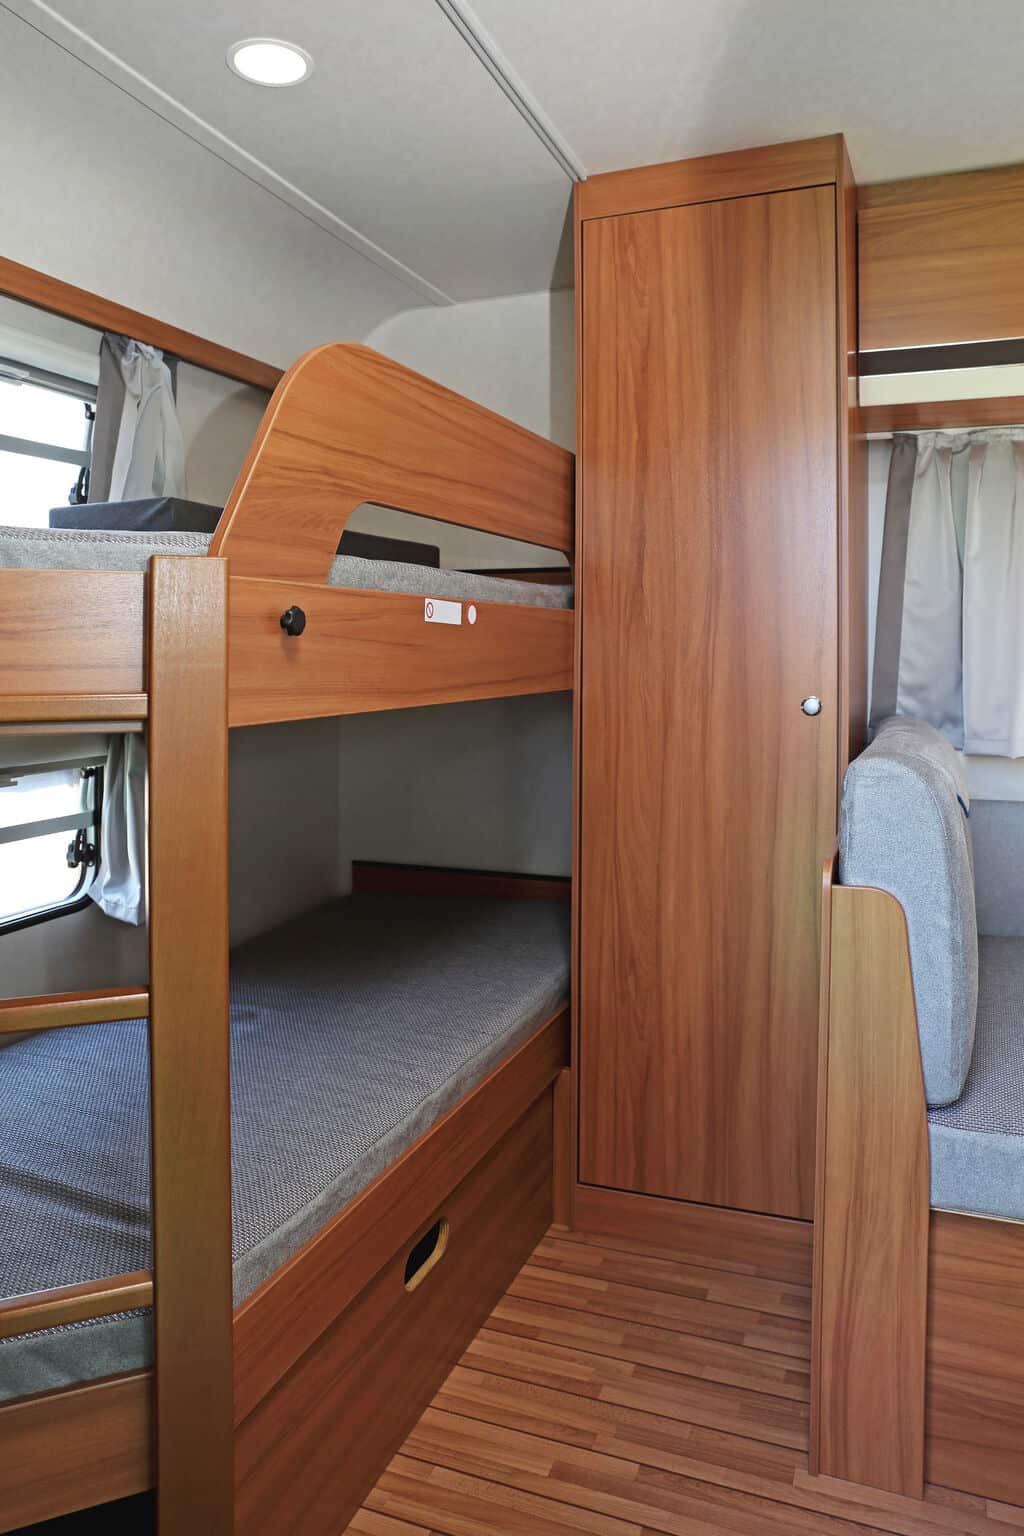 5 Travel Trailers With Quad Bunkhouse, Ultra Lite Campers With Bunk Beds